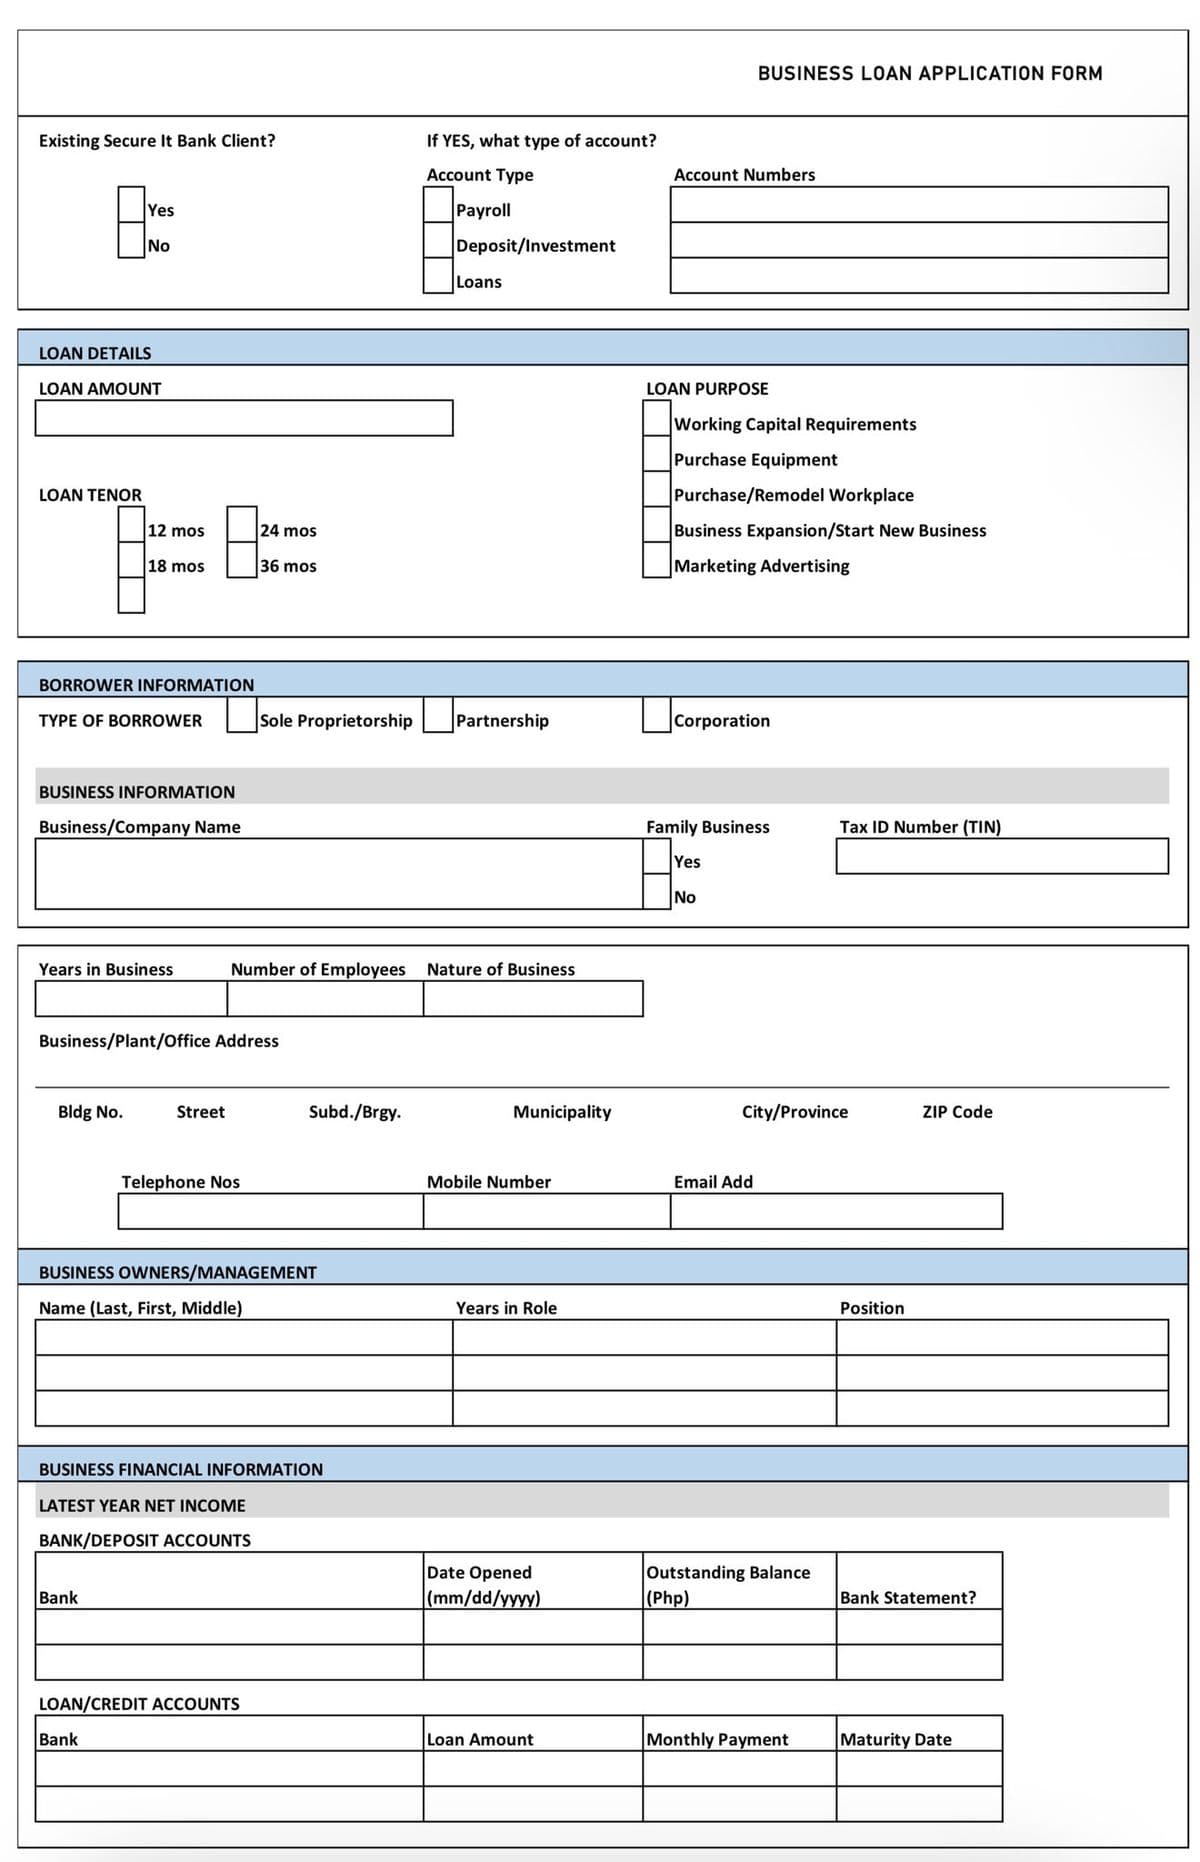 BUSINESS LOAN APPLICATION FORM
Existing Secure It Bank Client?
If YES, what type of account?
Account Type
Account Numbers
Yes
Payroll
No
Deposit/Investment
Loans
LOAN DETAILS
LOAN AMOUNT
LOAN PURPOSE
Working Capital Requirements
Purchase Equipment
LOAN TENOR
Purchase/Remodel Workplace
12 mos
24 mos
Business Expansion/Start New Business
18 mos
36 mos
Marketing Advertising
BORROWER INFORMATION
Sole Proprietorship
Partnership
Corporation
TYPE OF BORROWER
BUSINESS INFORMATION
Business/Company Name
Family Business
Tax ID Number (TIN)
Yes
No
Years in Business
Number of Employees
Nature of Business
Business/Plant/Office Address
Bldg No.
Street
Subd./Brgy.
Municipality
City/Province
ZIP Code
Telephone Nos
Mobile Number
Email Add
BUSINESS OWNERS/MANAGEMENT
Name (Last, First, Middle)
Years in Role
Position
BUSINESS FINANCIAL INFORMATION
LATEST YEAR NET INCOME
BANK/DEPOSIT ACCOUNTS
Date Opened
(mm/dd/yyyy)
Outstanding Balance
(Php)
Bank
Bank Statement?
LOAN/CREDIT ACCOUNTS
Bank
Loan Amount
Monthly Payment
Maturity Date
